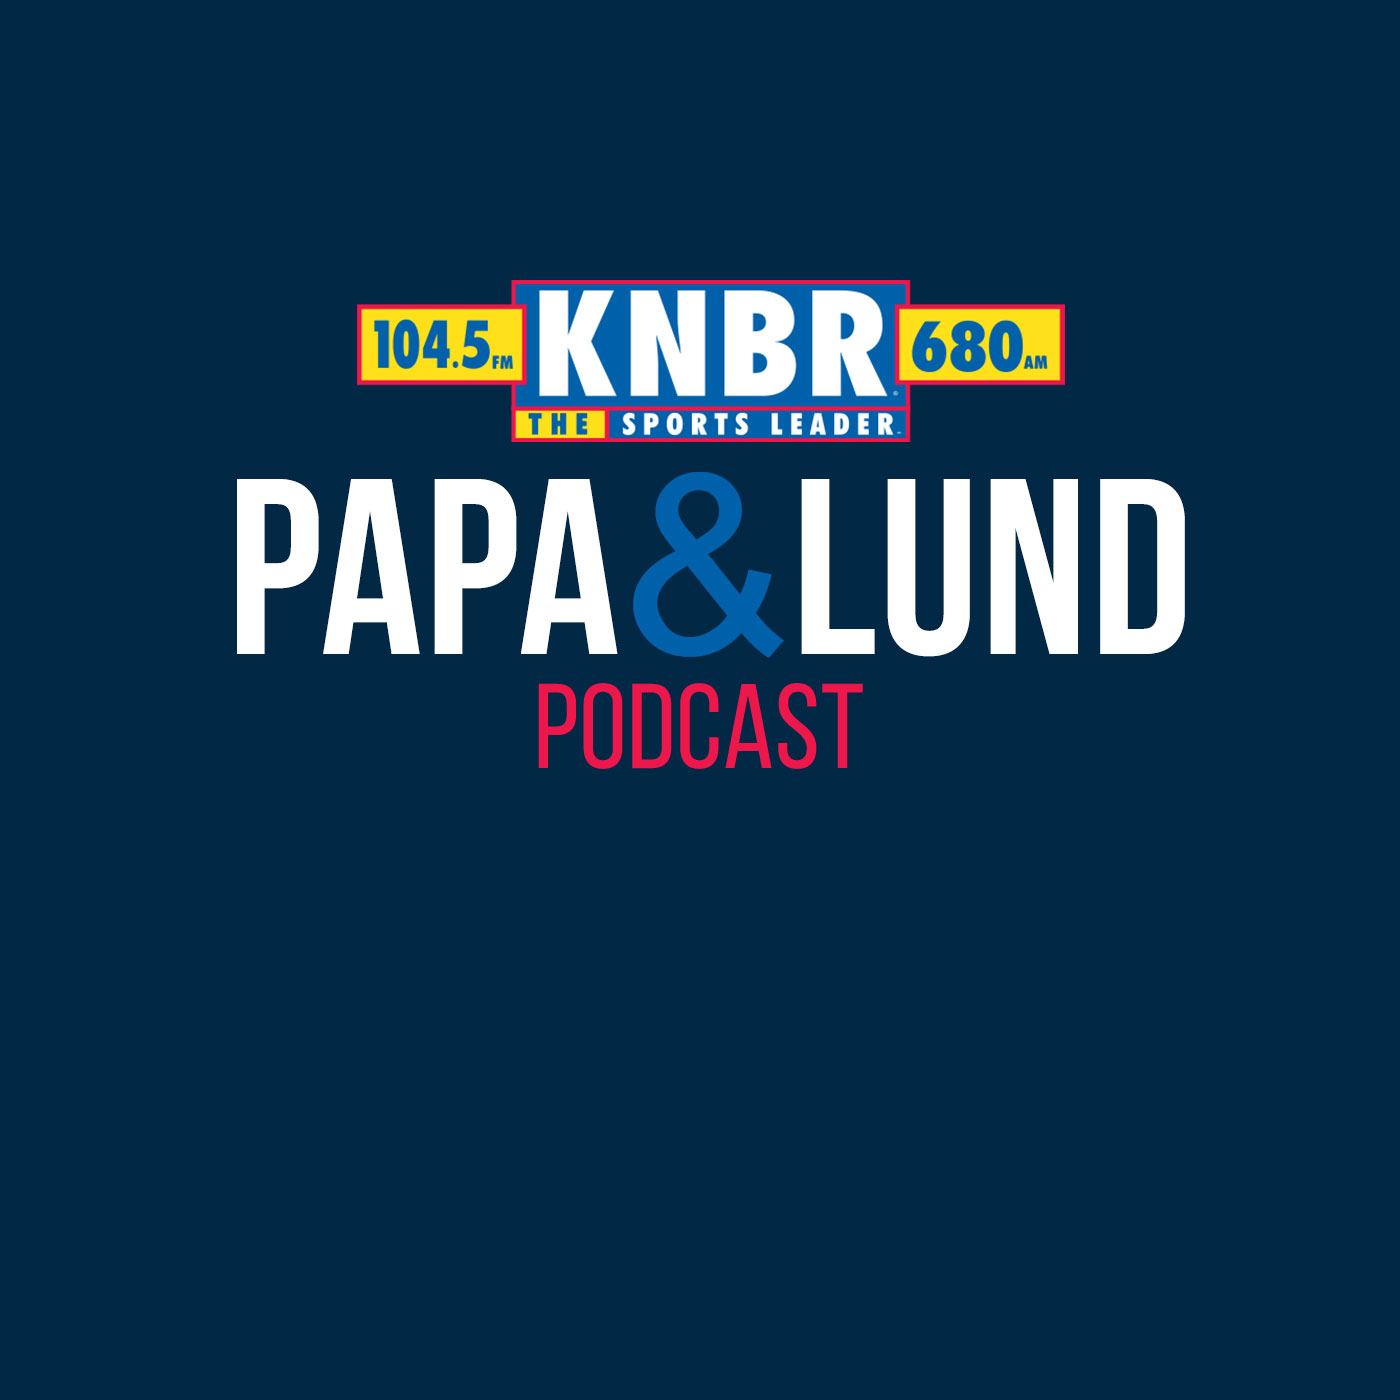 11-19 49ers insider Matt Maiocco joins Papa & Lund: 49ers should be in the playoff hunt at the end of the season